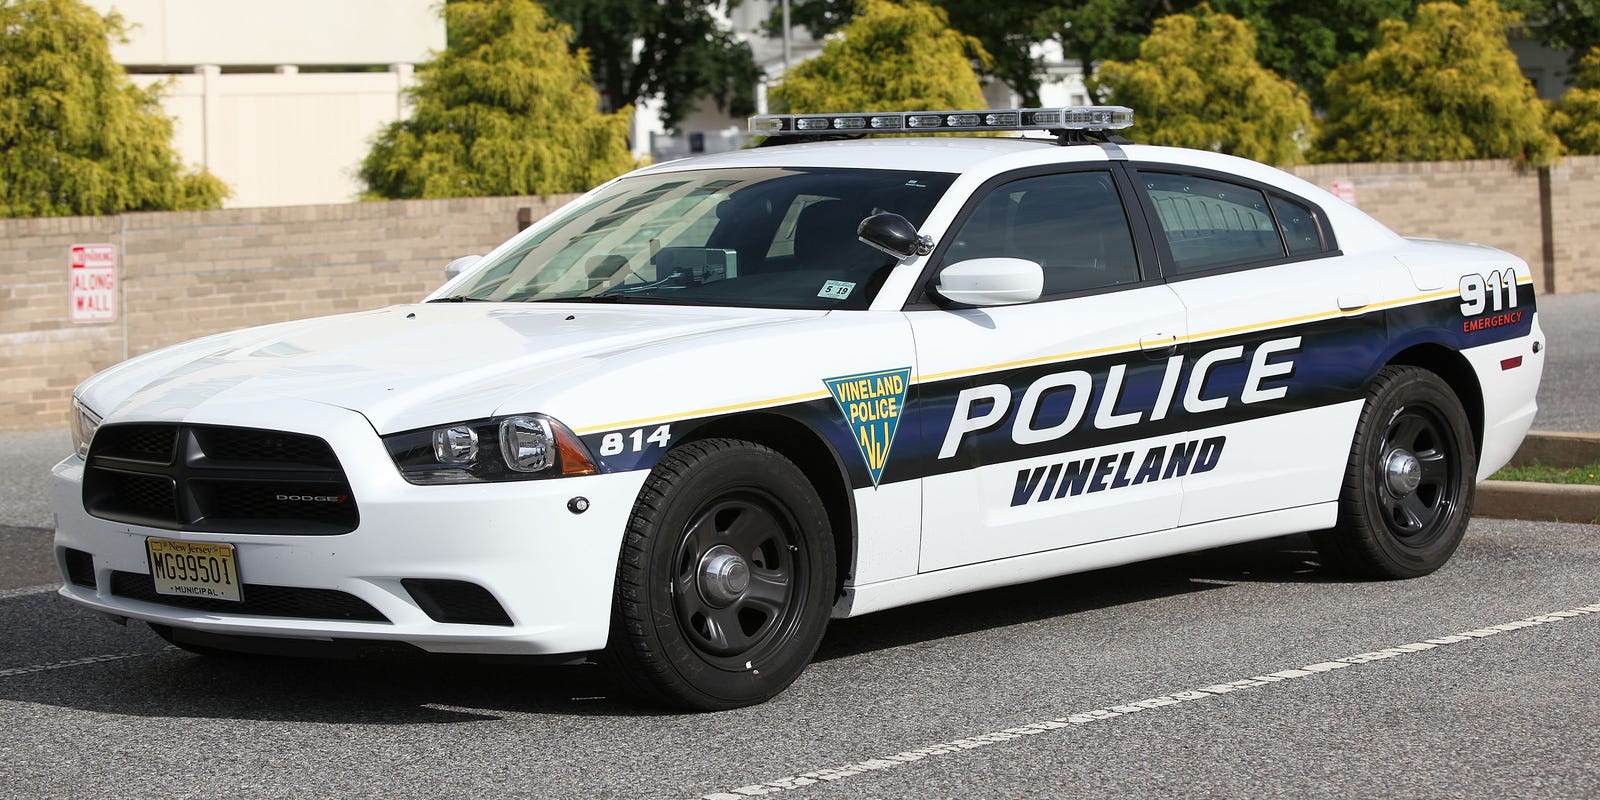 Vineland Police for March 20